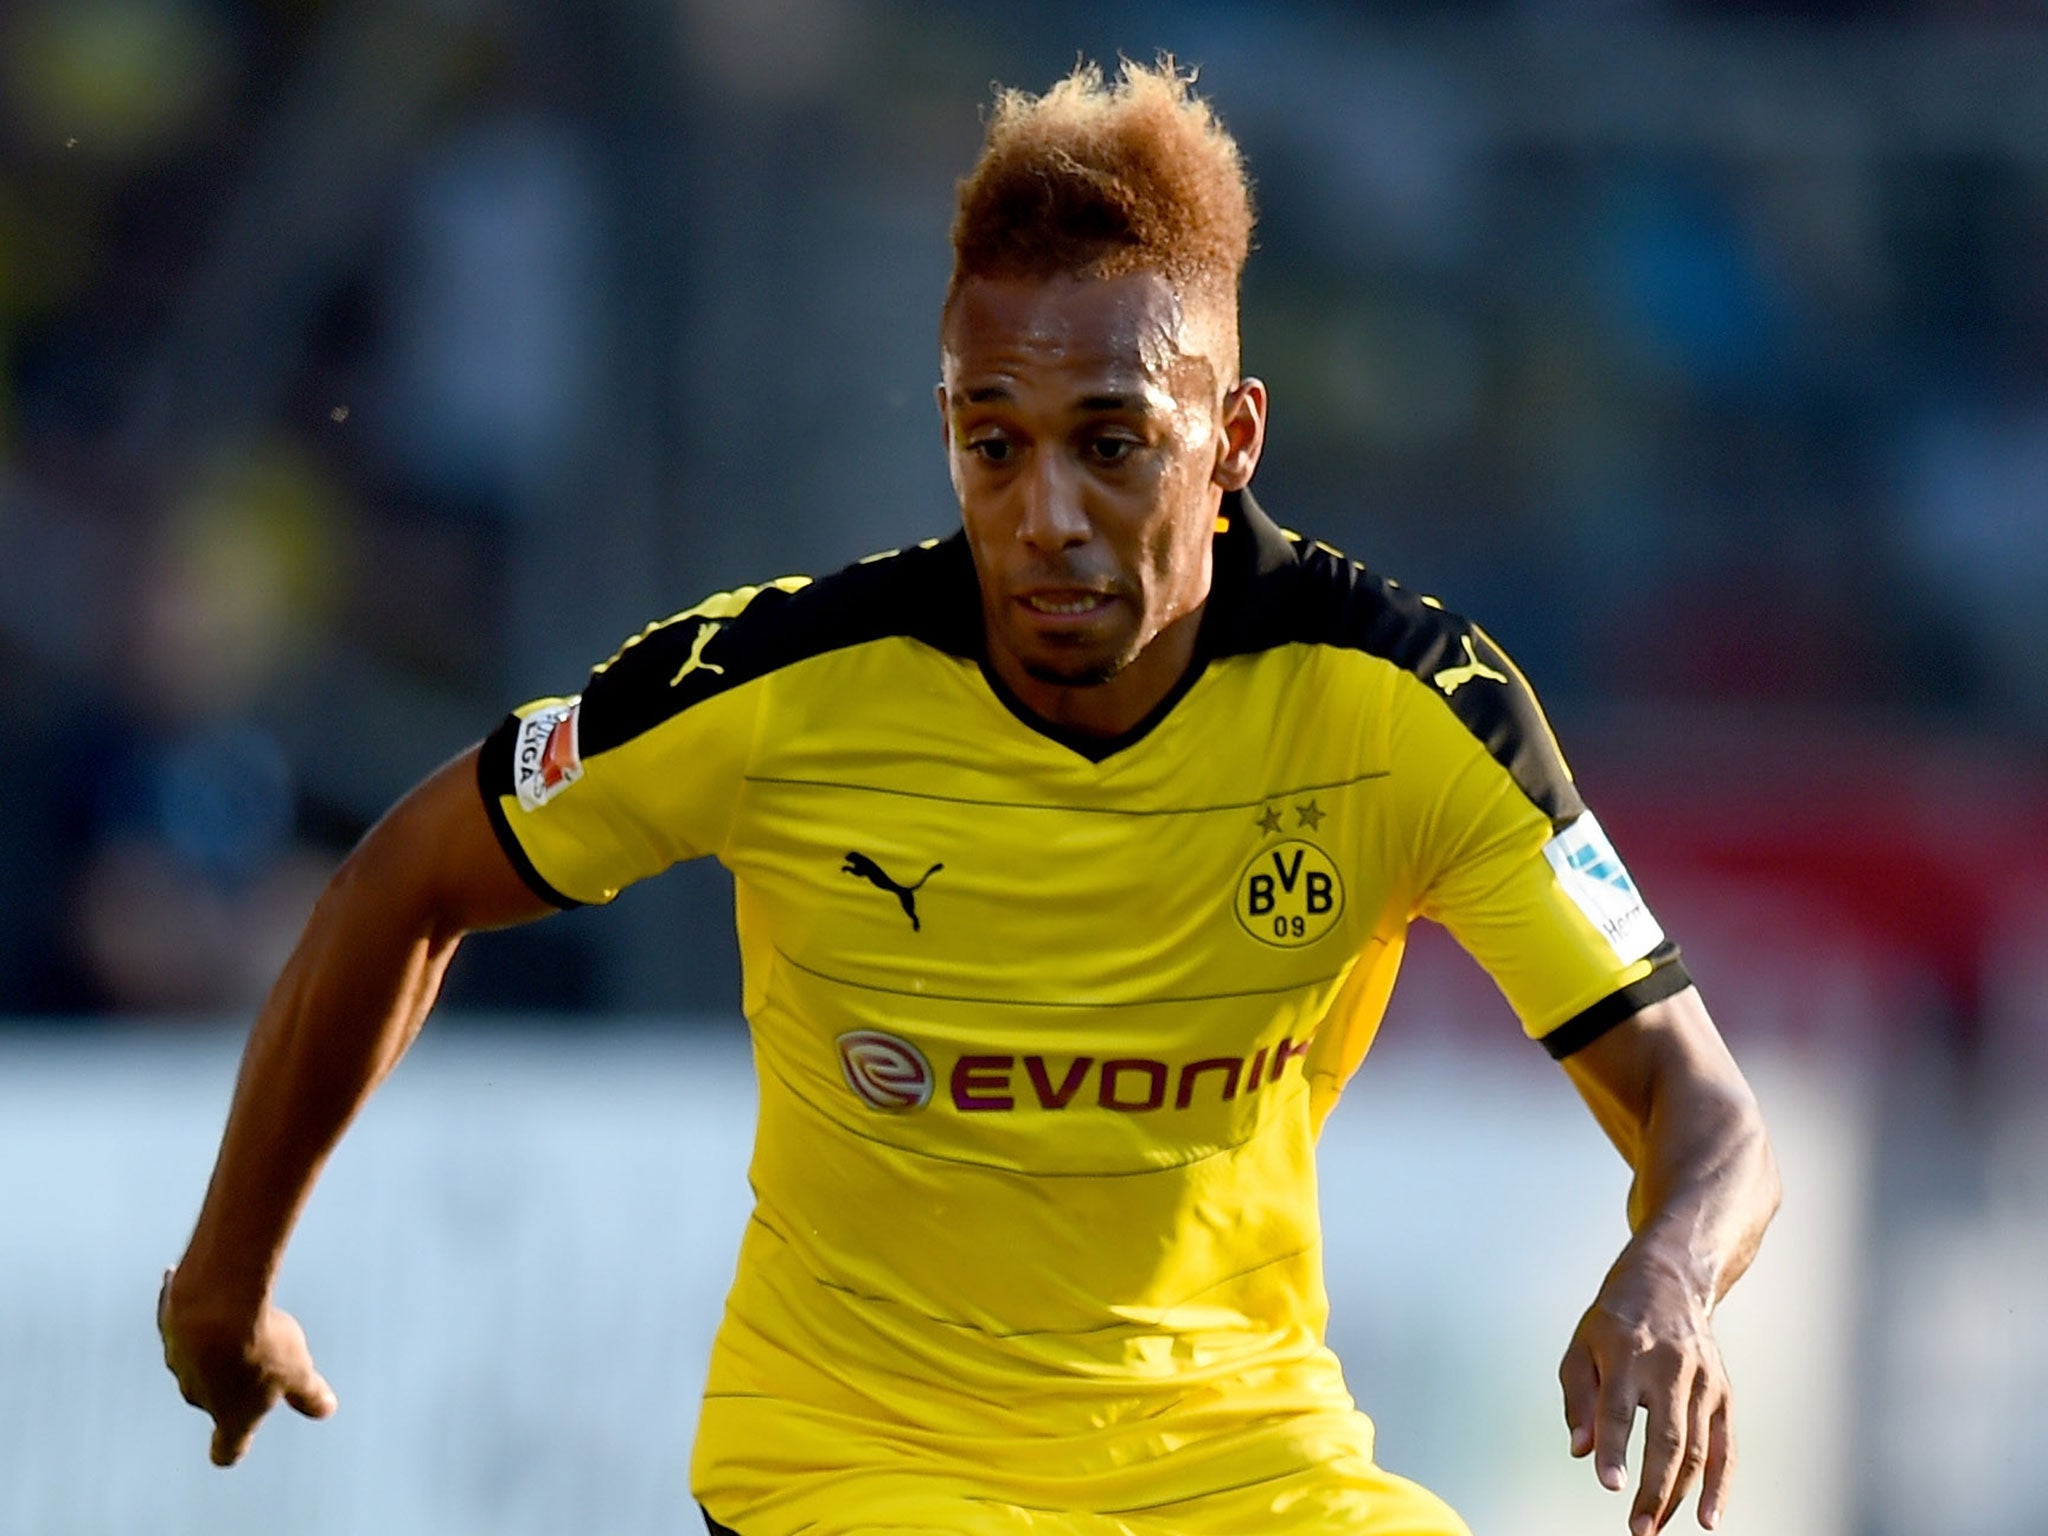 Arsenal are believed to have had a £28.7m bid for Aubameyang rejected